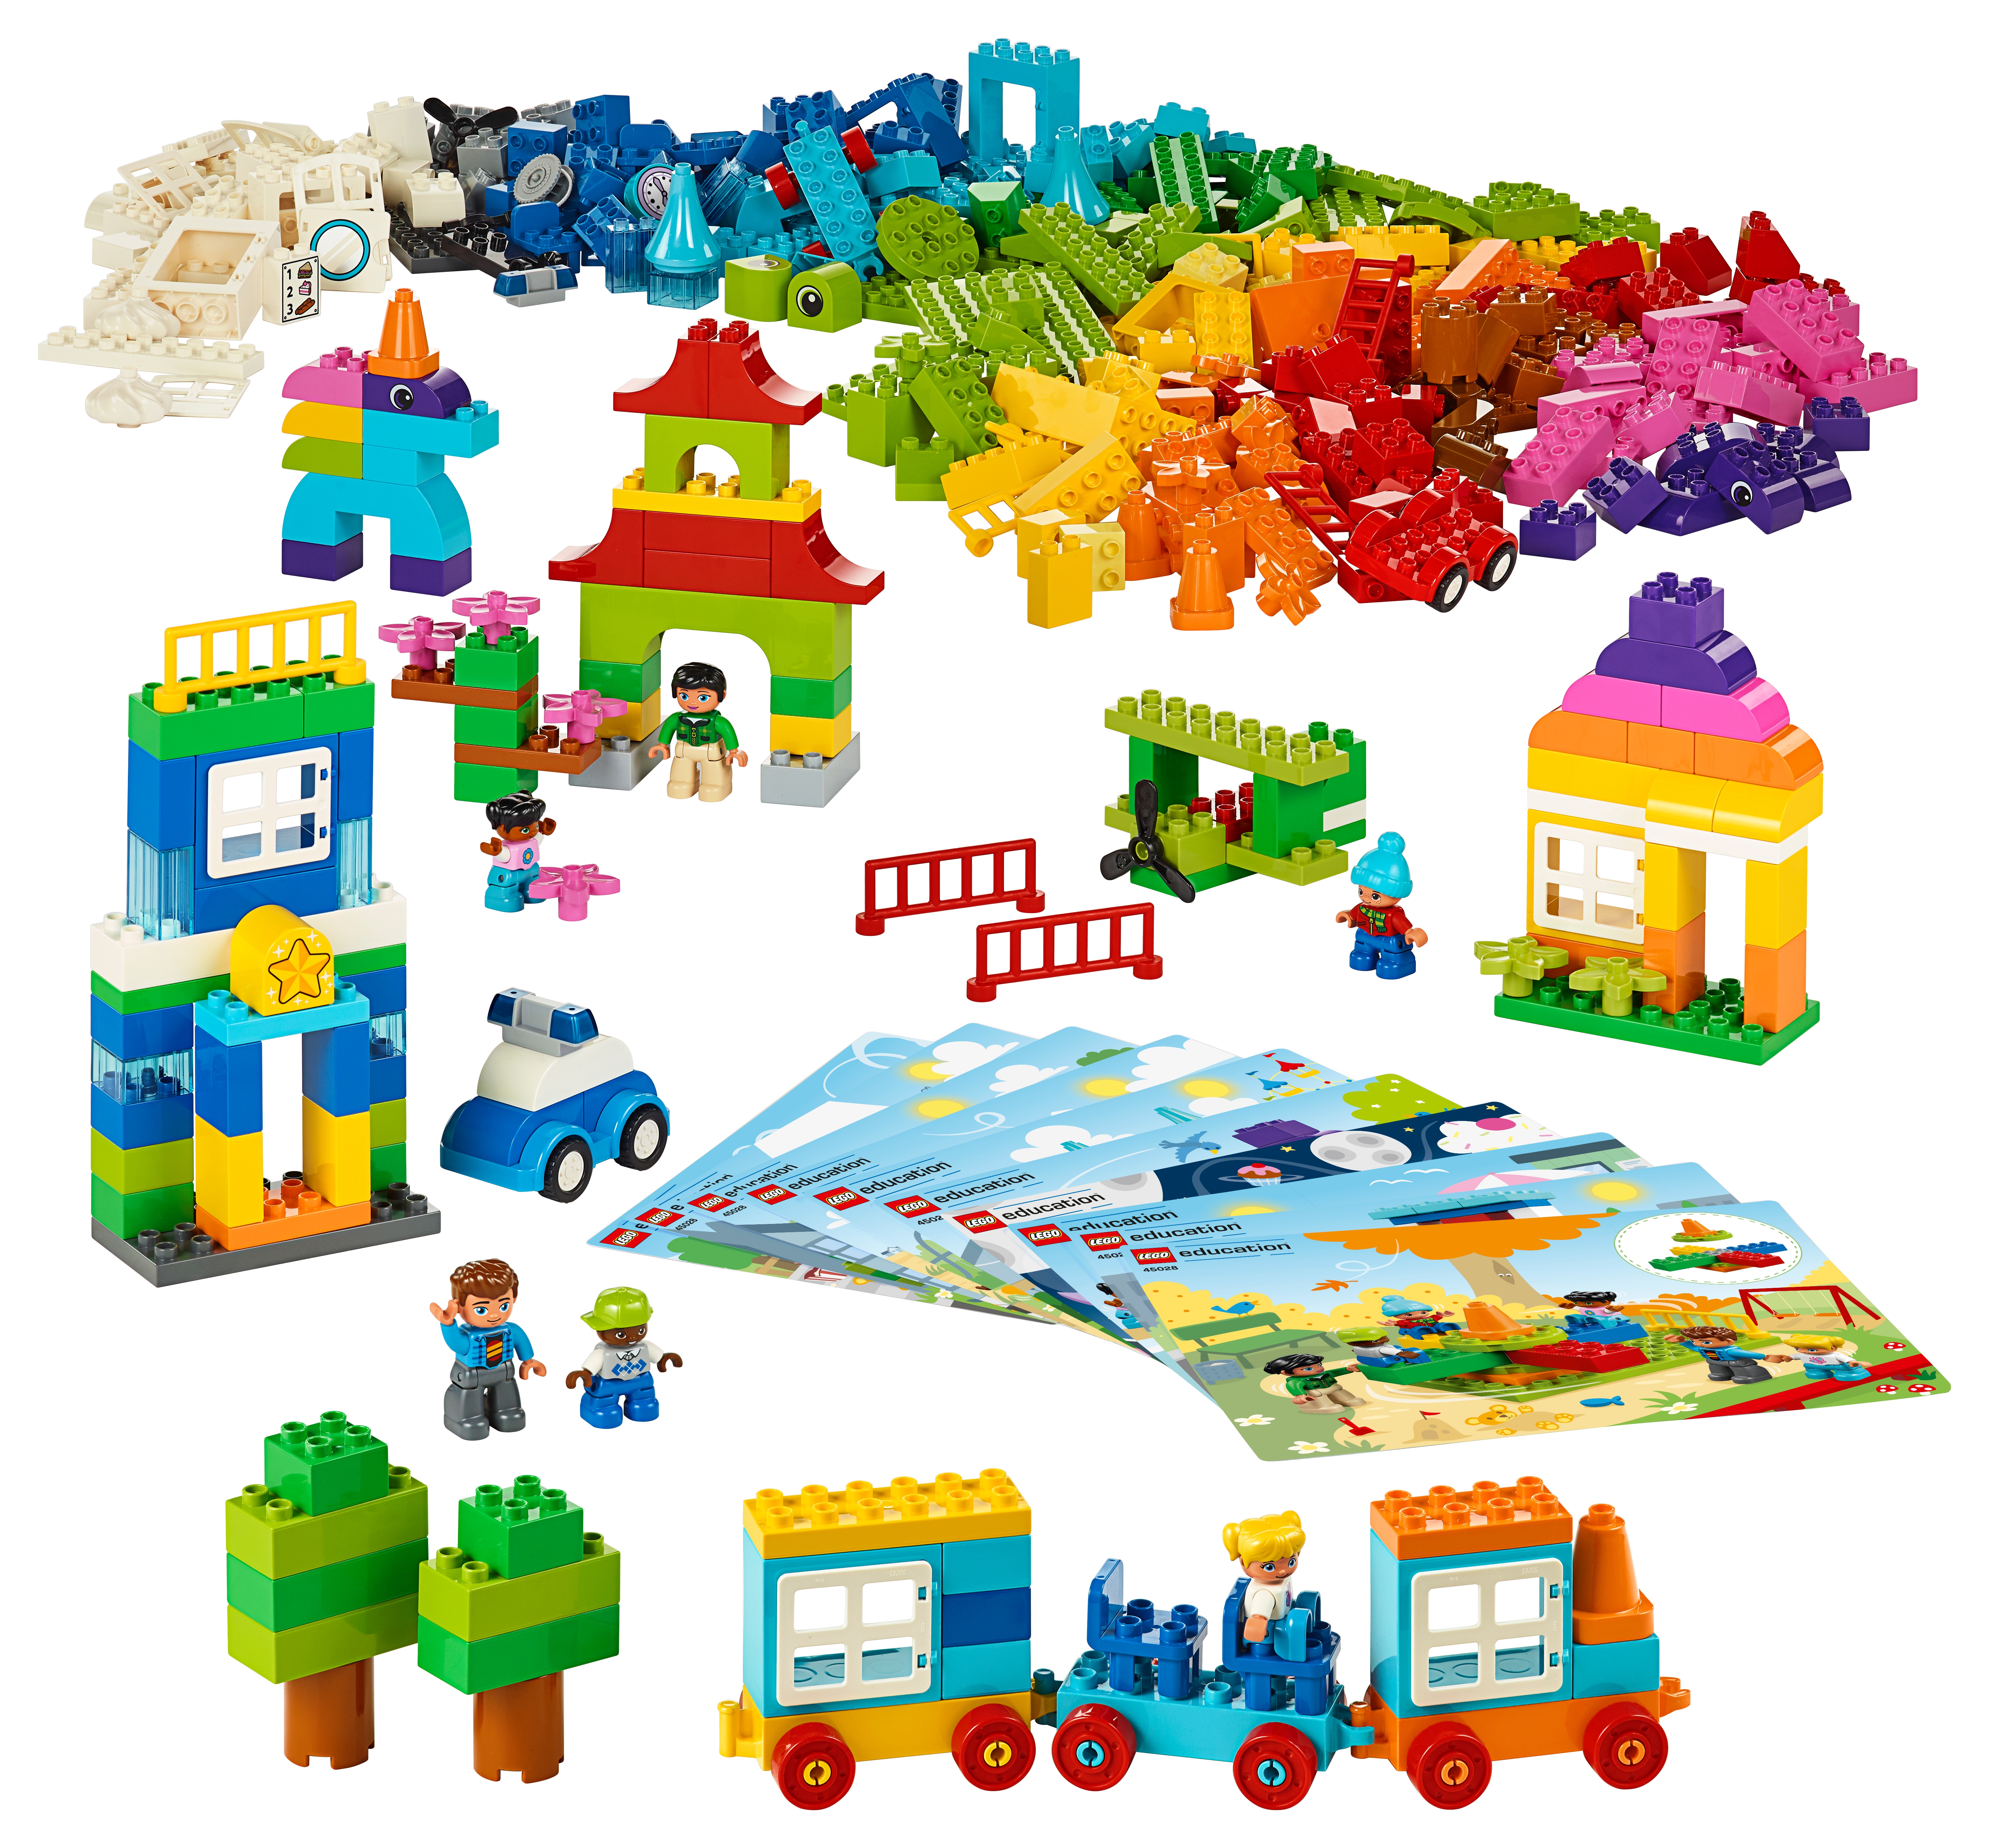 Details about   120 STEM Toy Engineering Science Architecture Mathematics Edu... in 1Robot Kit 